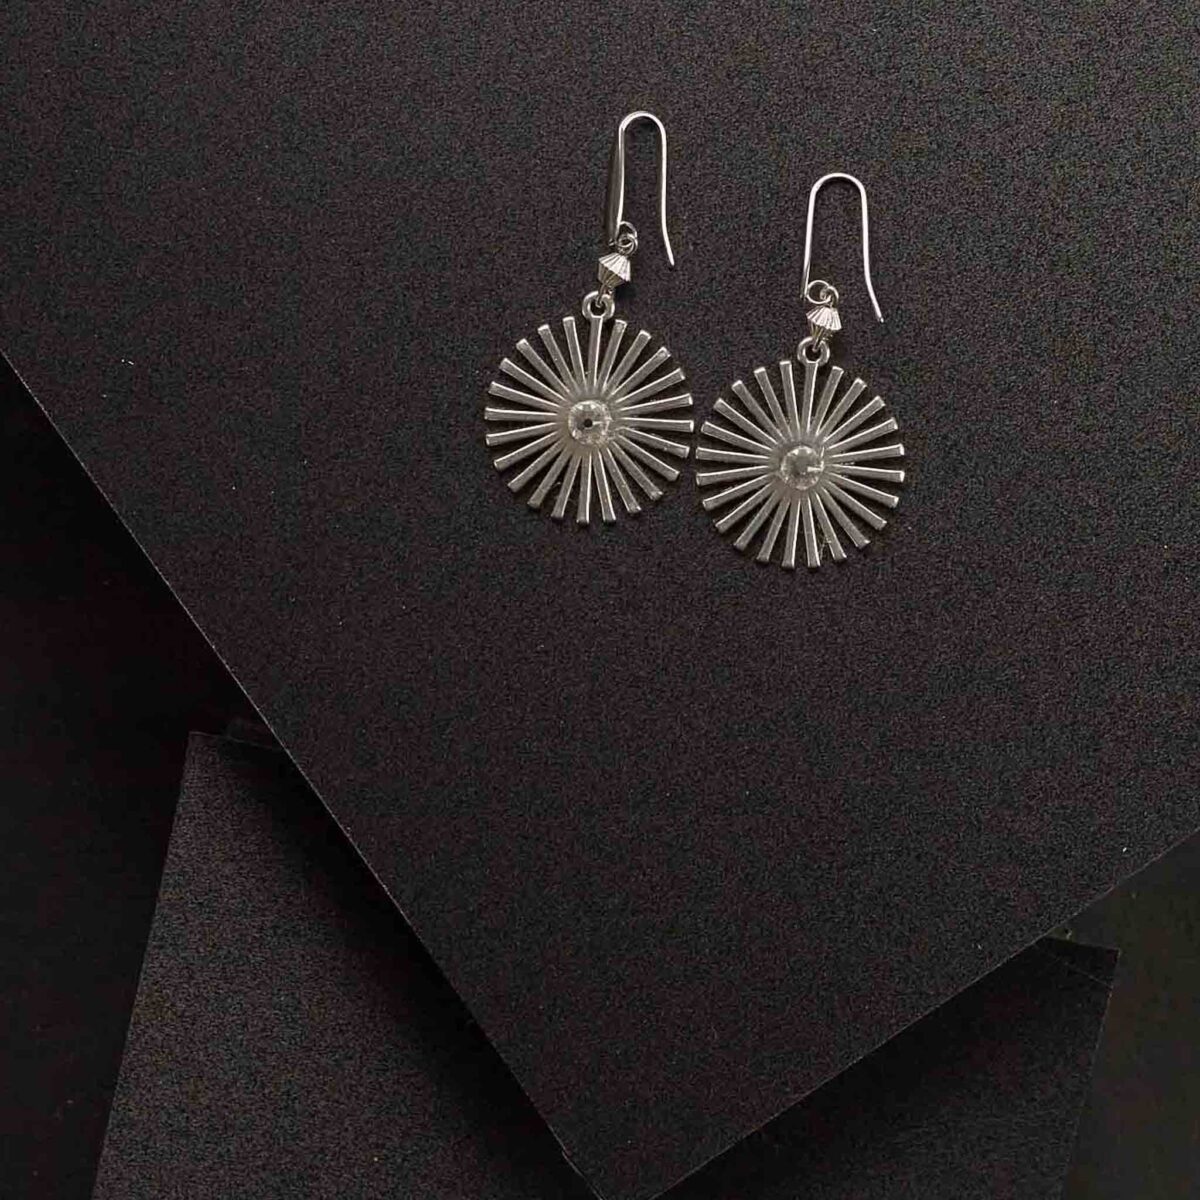 Earrings With Radial Pattern And White Crystal